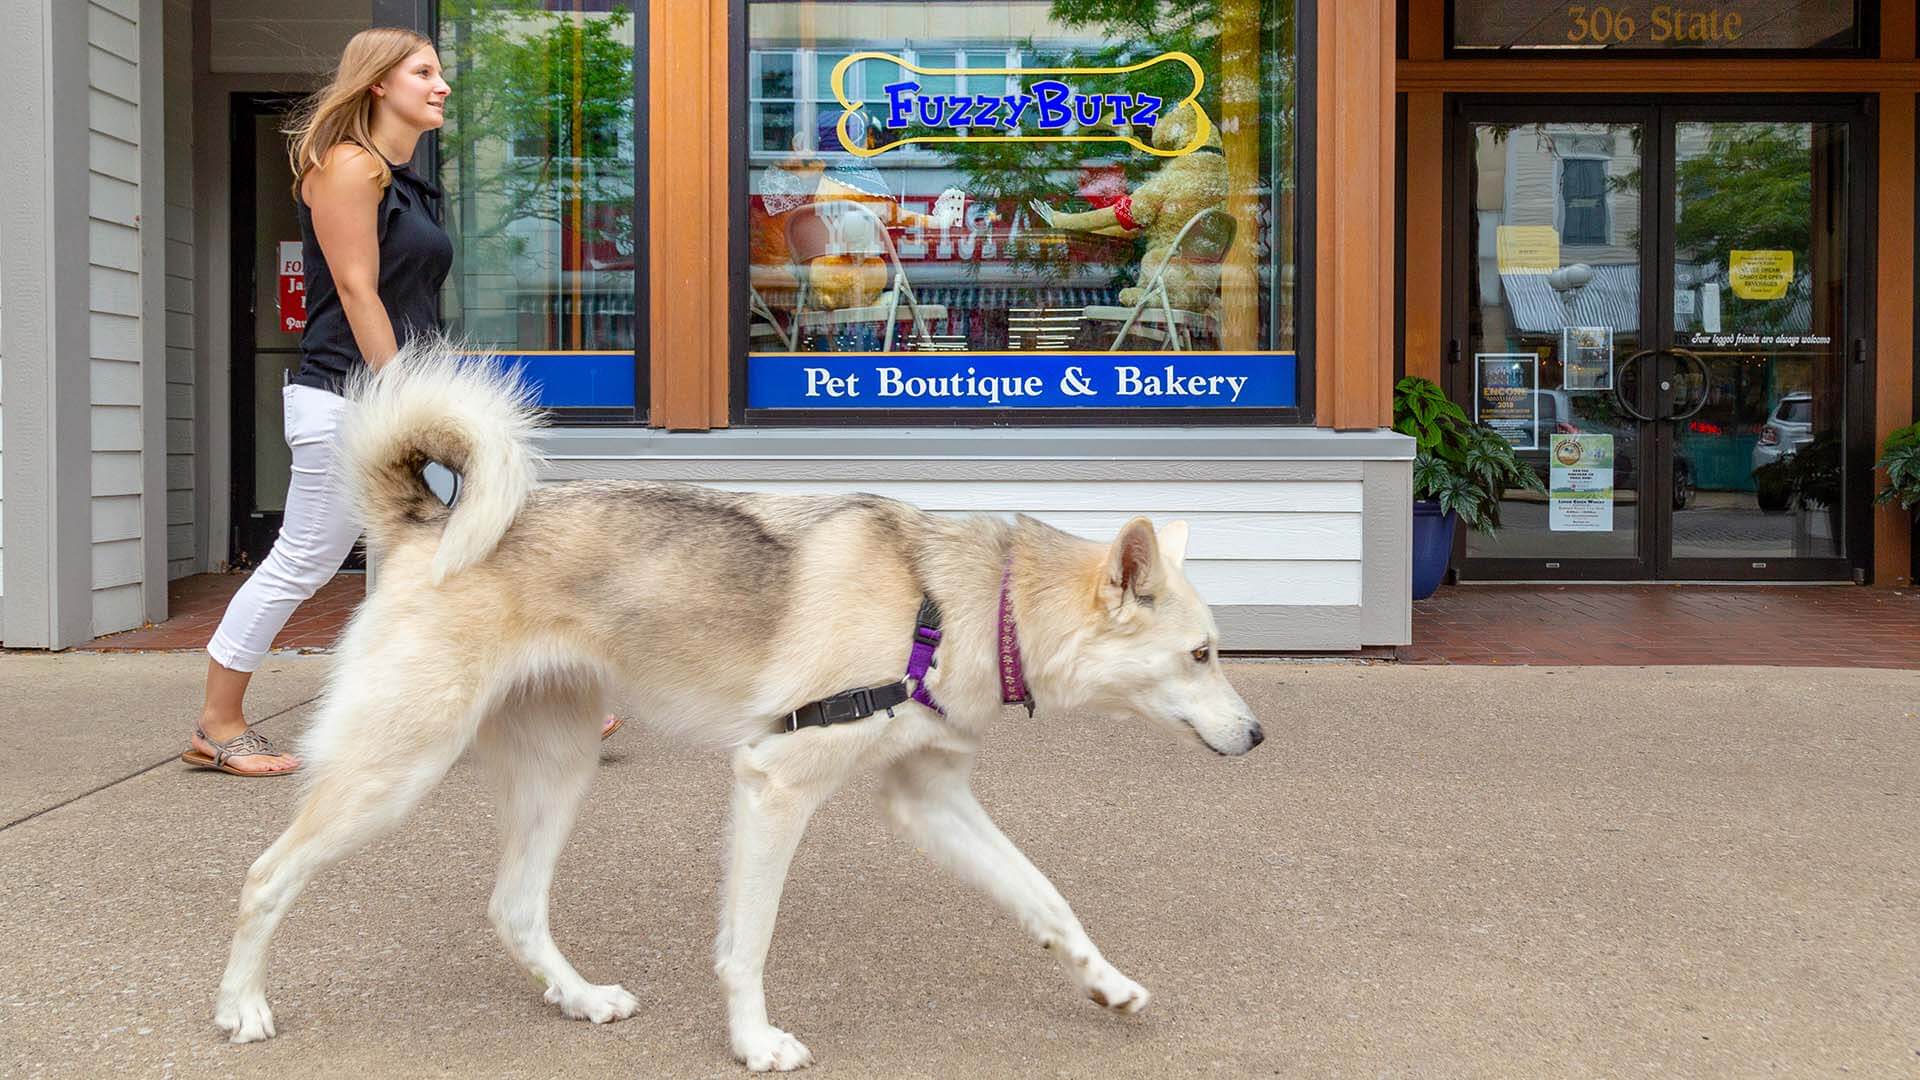 A person walking with a dog in downtown Saint Joseph Michigan